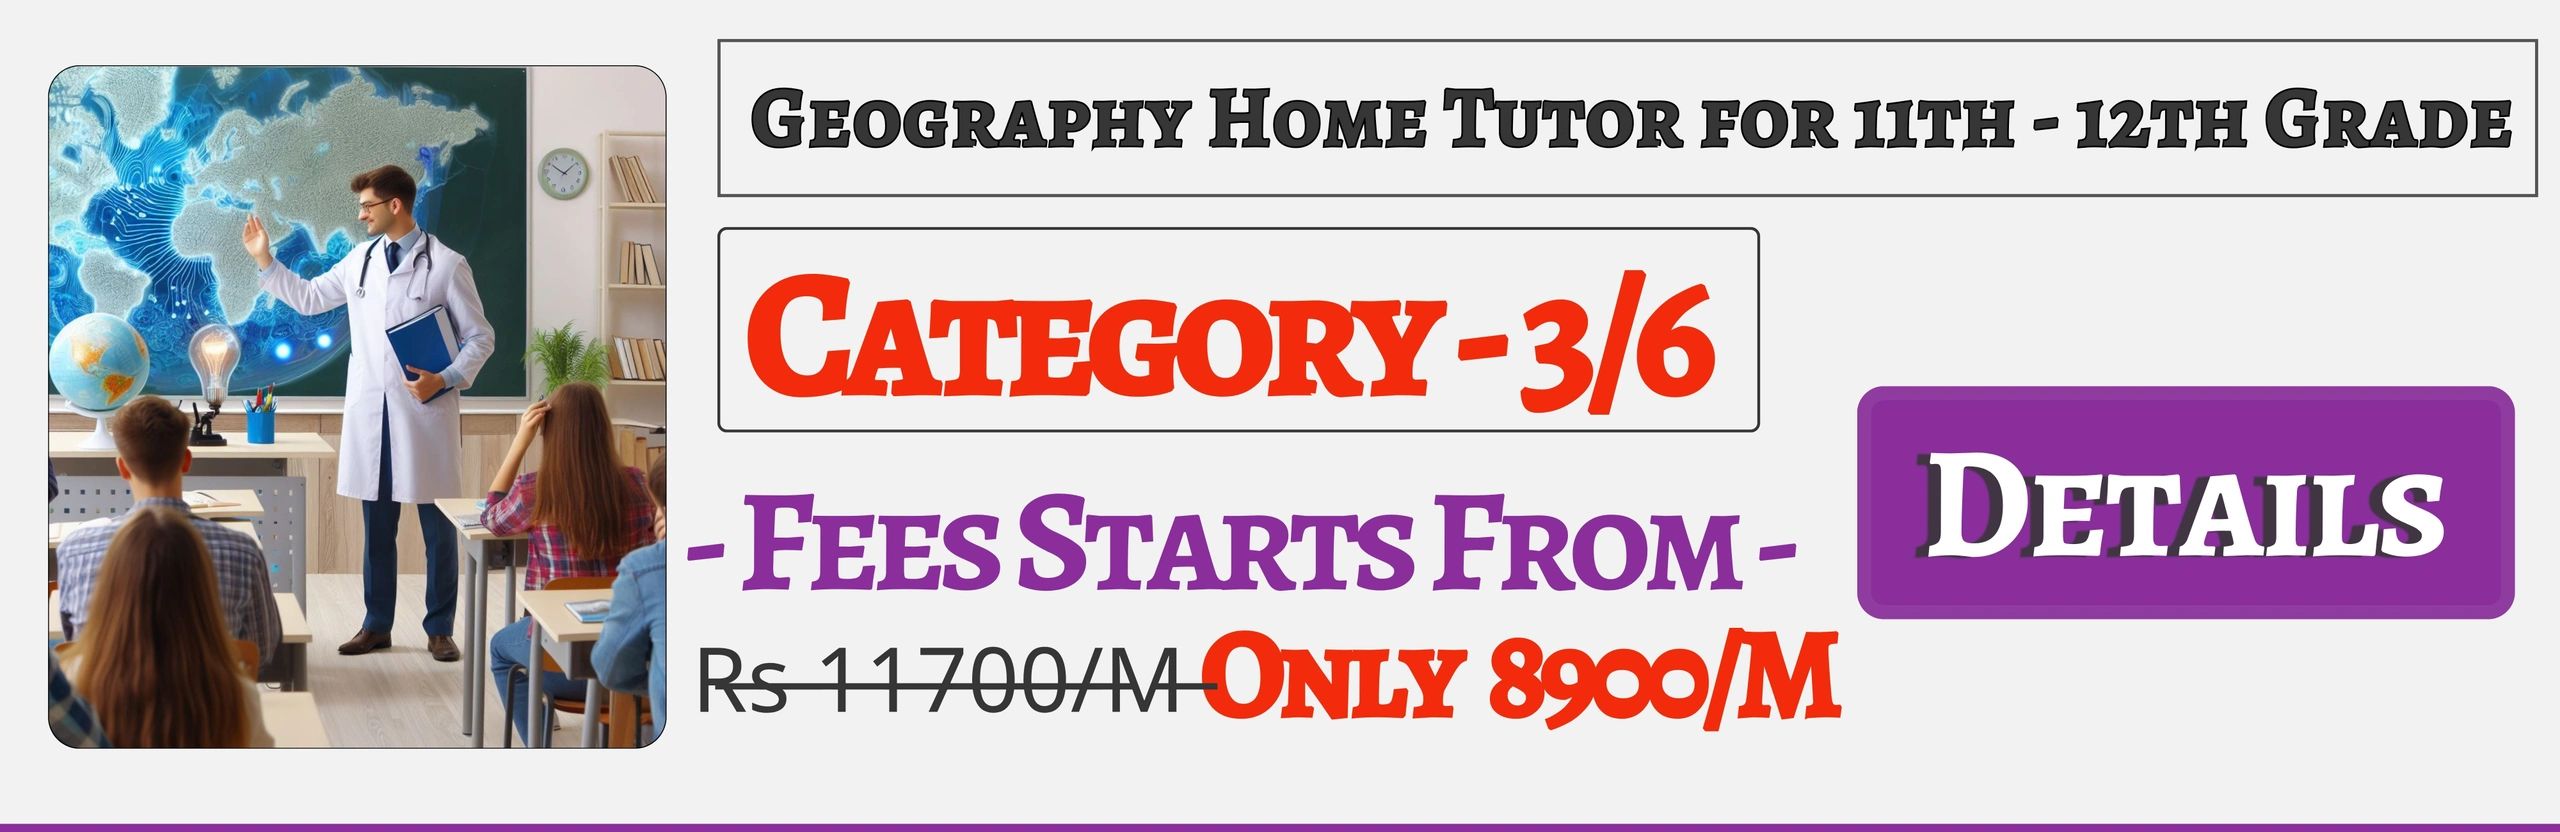 Book Best Nearby Geography Home Tuition Tutors For 11th & 12th In Jaipur , Fees Only 8900/M